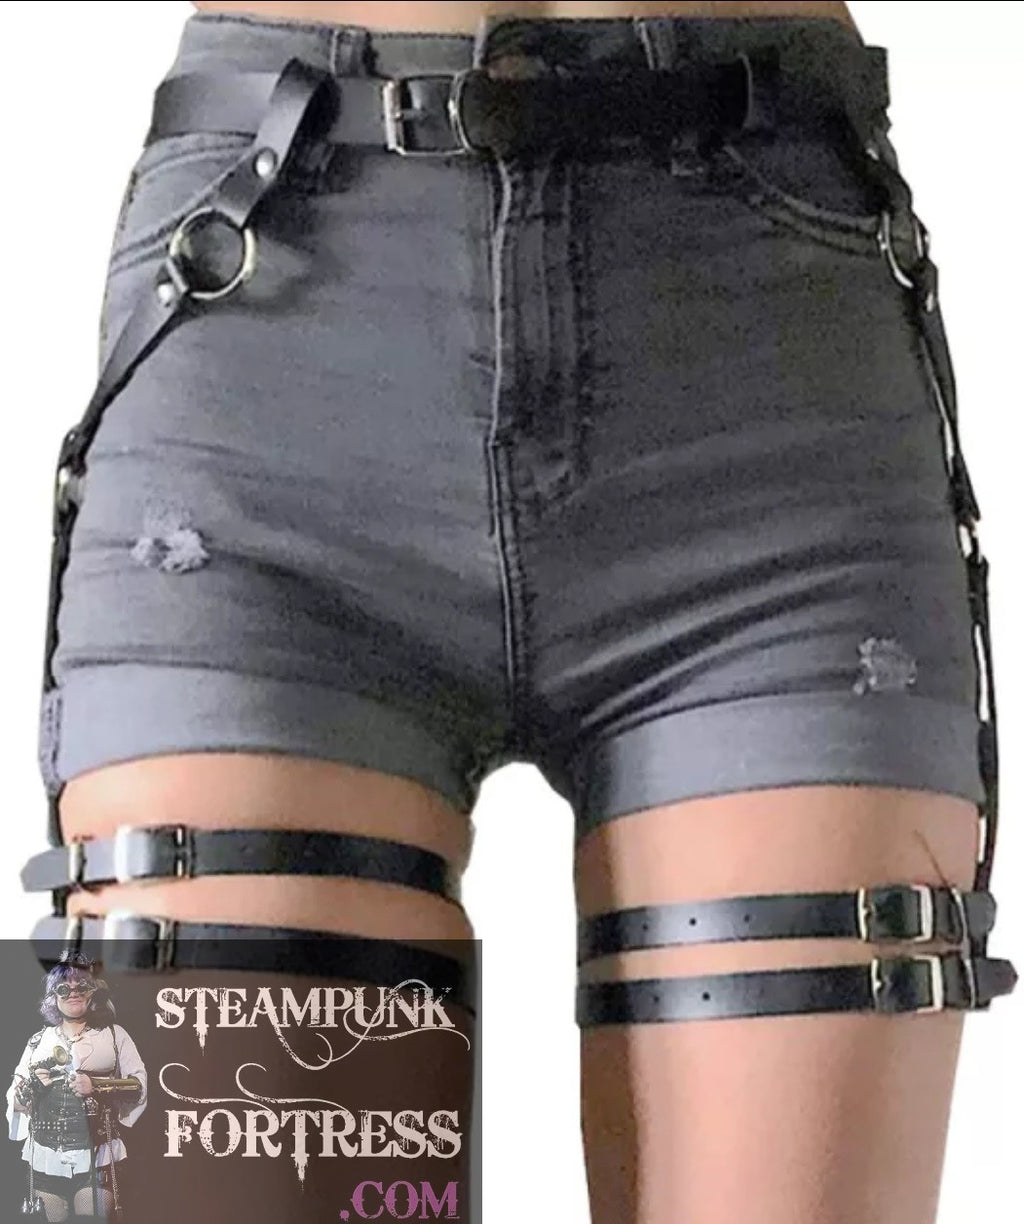 BLACK THIGH HOLSTER DOUBLE BUCKLES BELT SILVER ACCENTS SMALL TO LARGE 27" TO 38" LONG STEAMPUNK FORTRESS - MASS PRODUCED